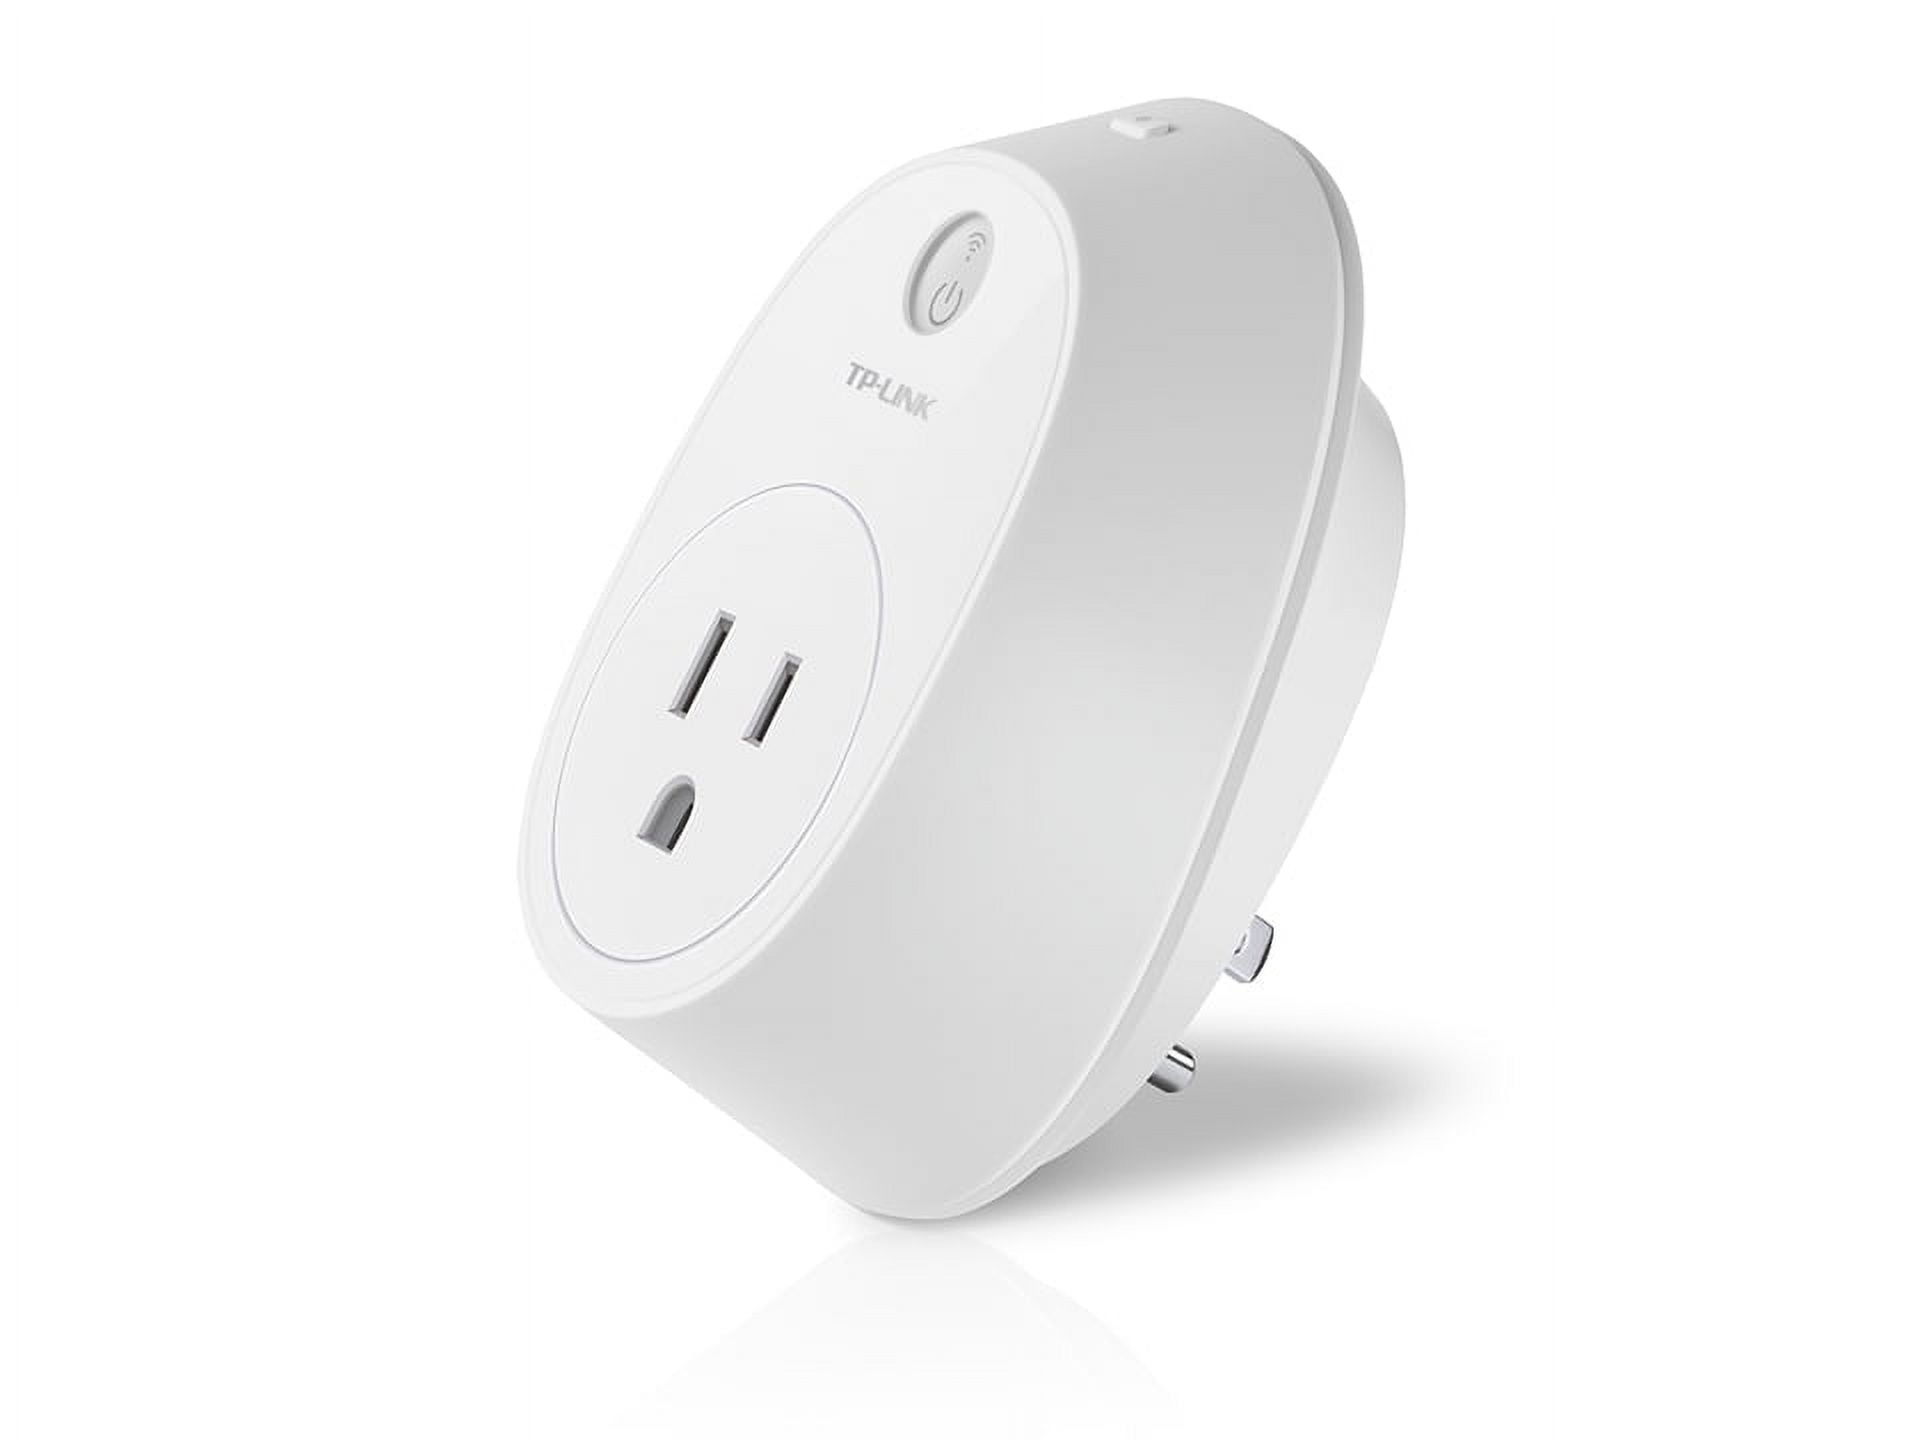 HS110, Wi-Fi Smart Plug with Energy Monitoring